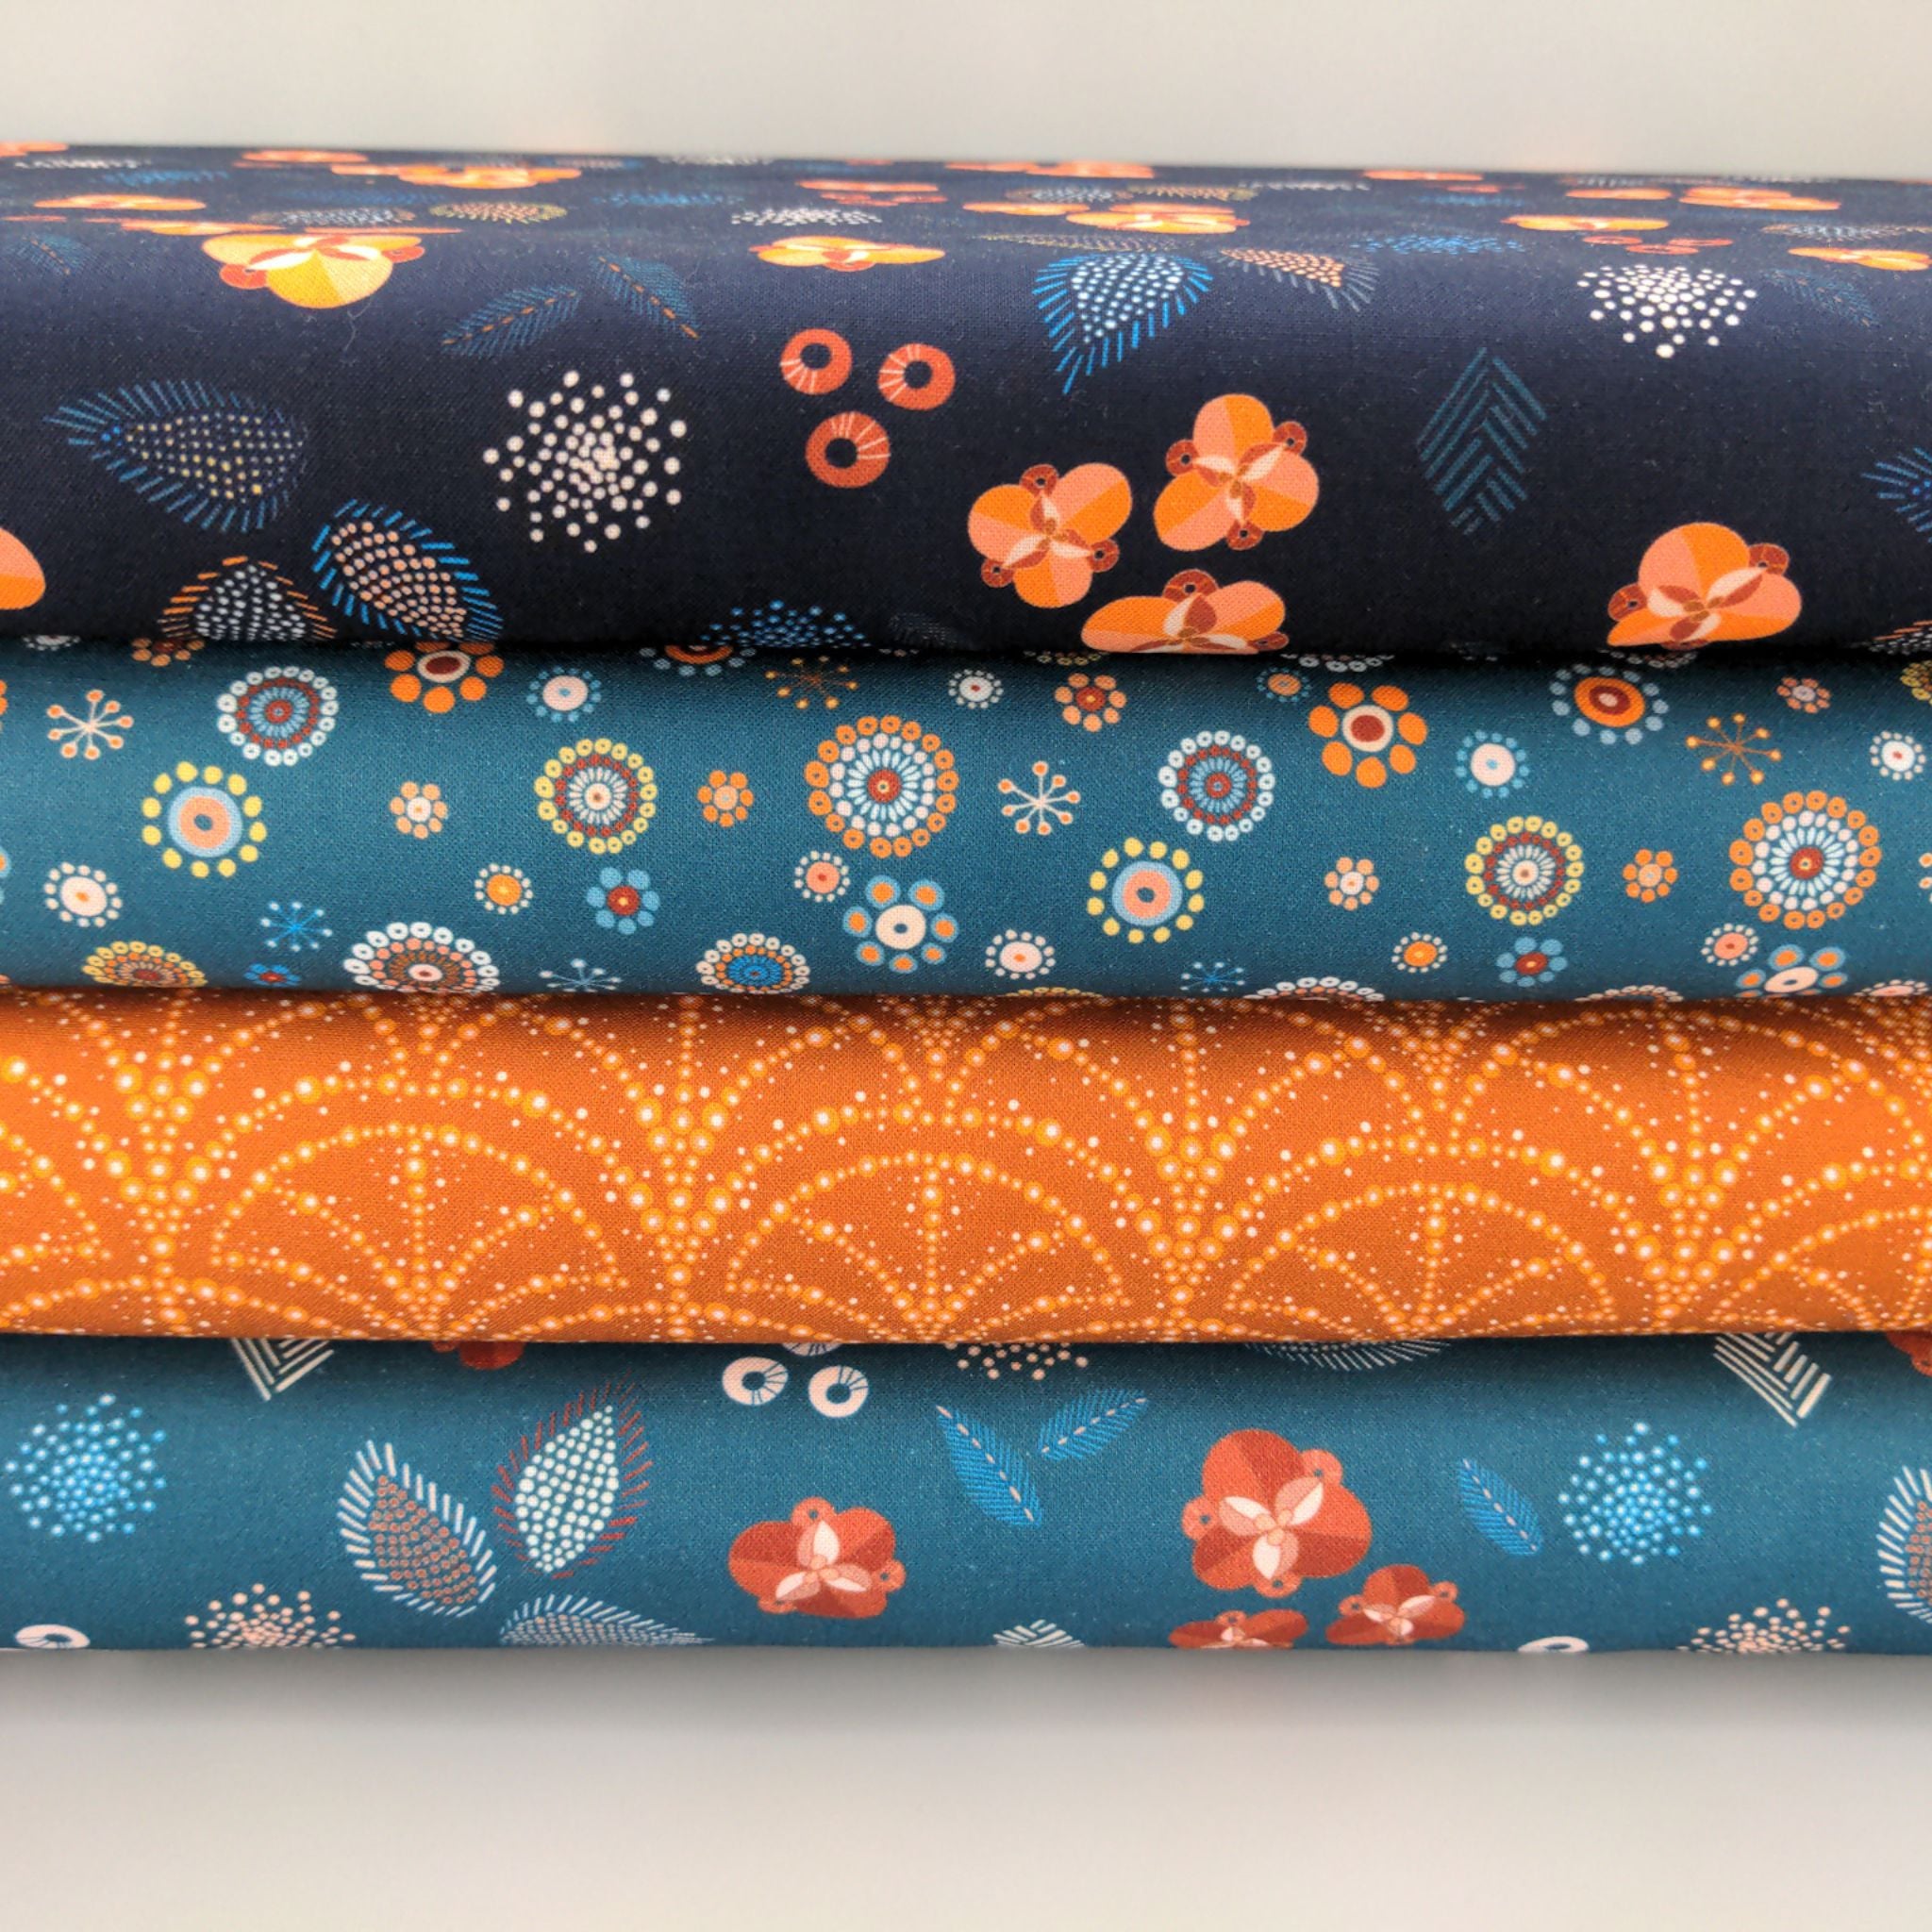 Scandi Flowers and Leaves on navy blue cotton fabric - Broderi by Dashwood Studio